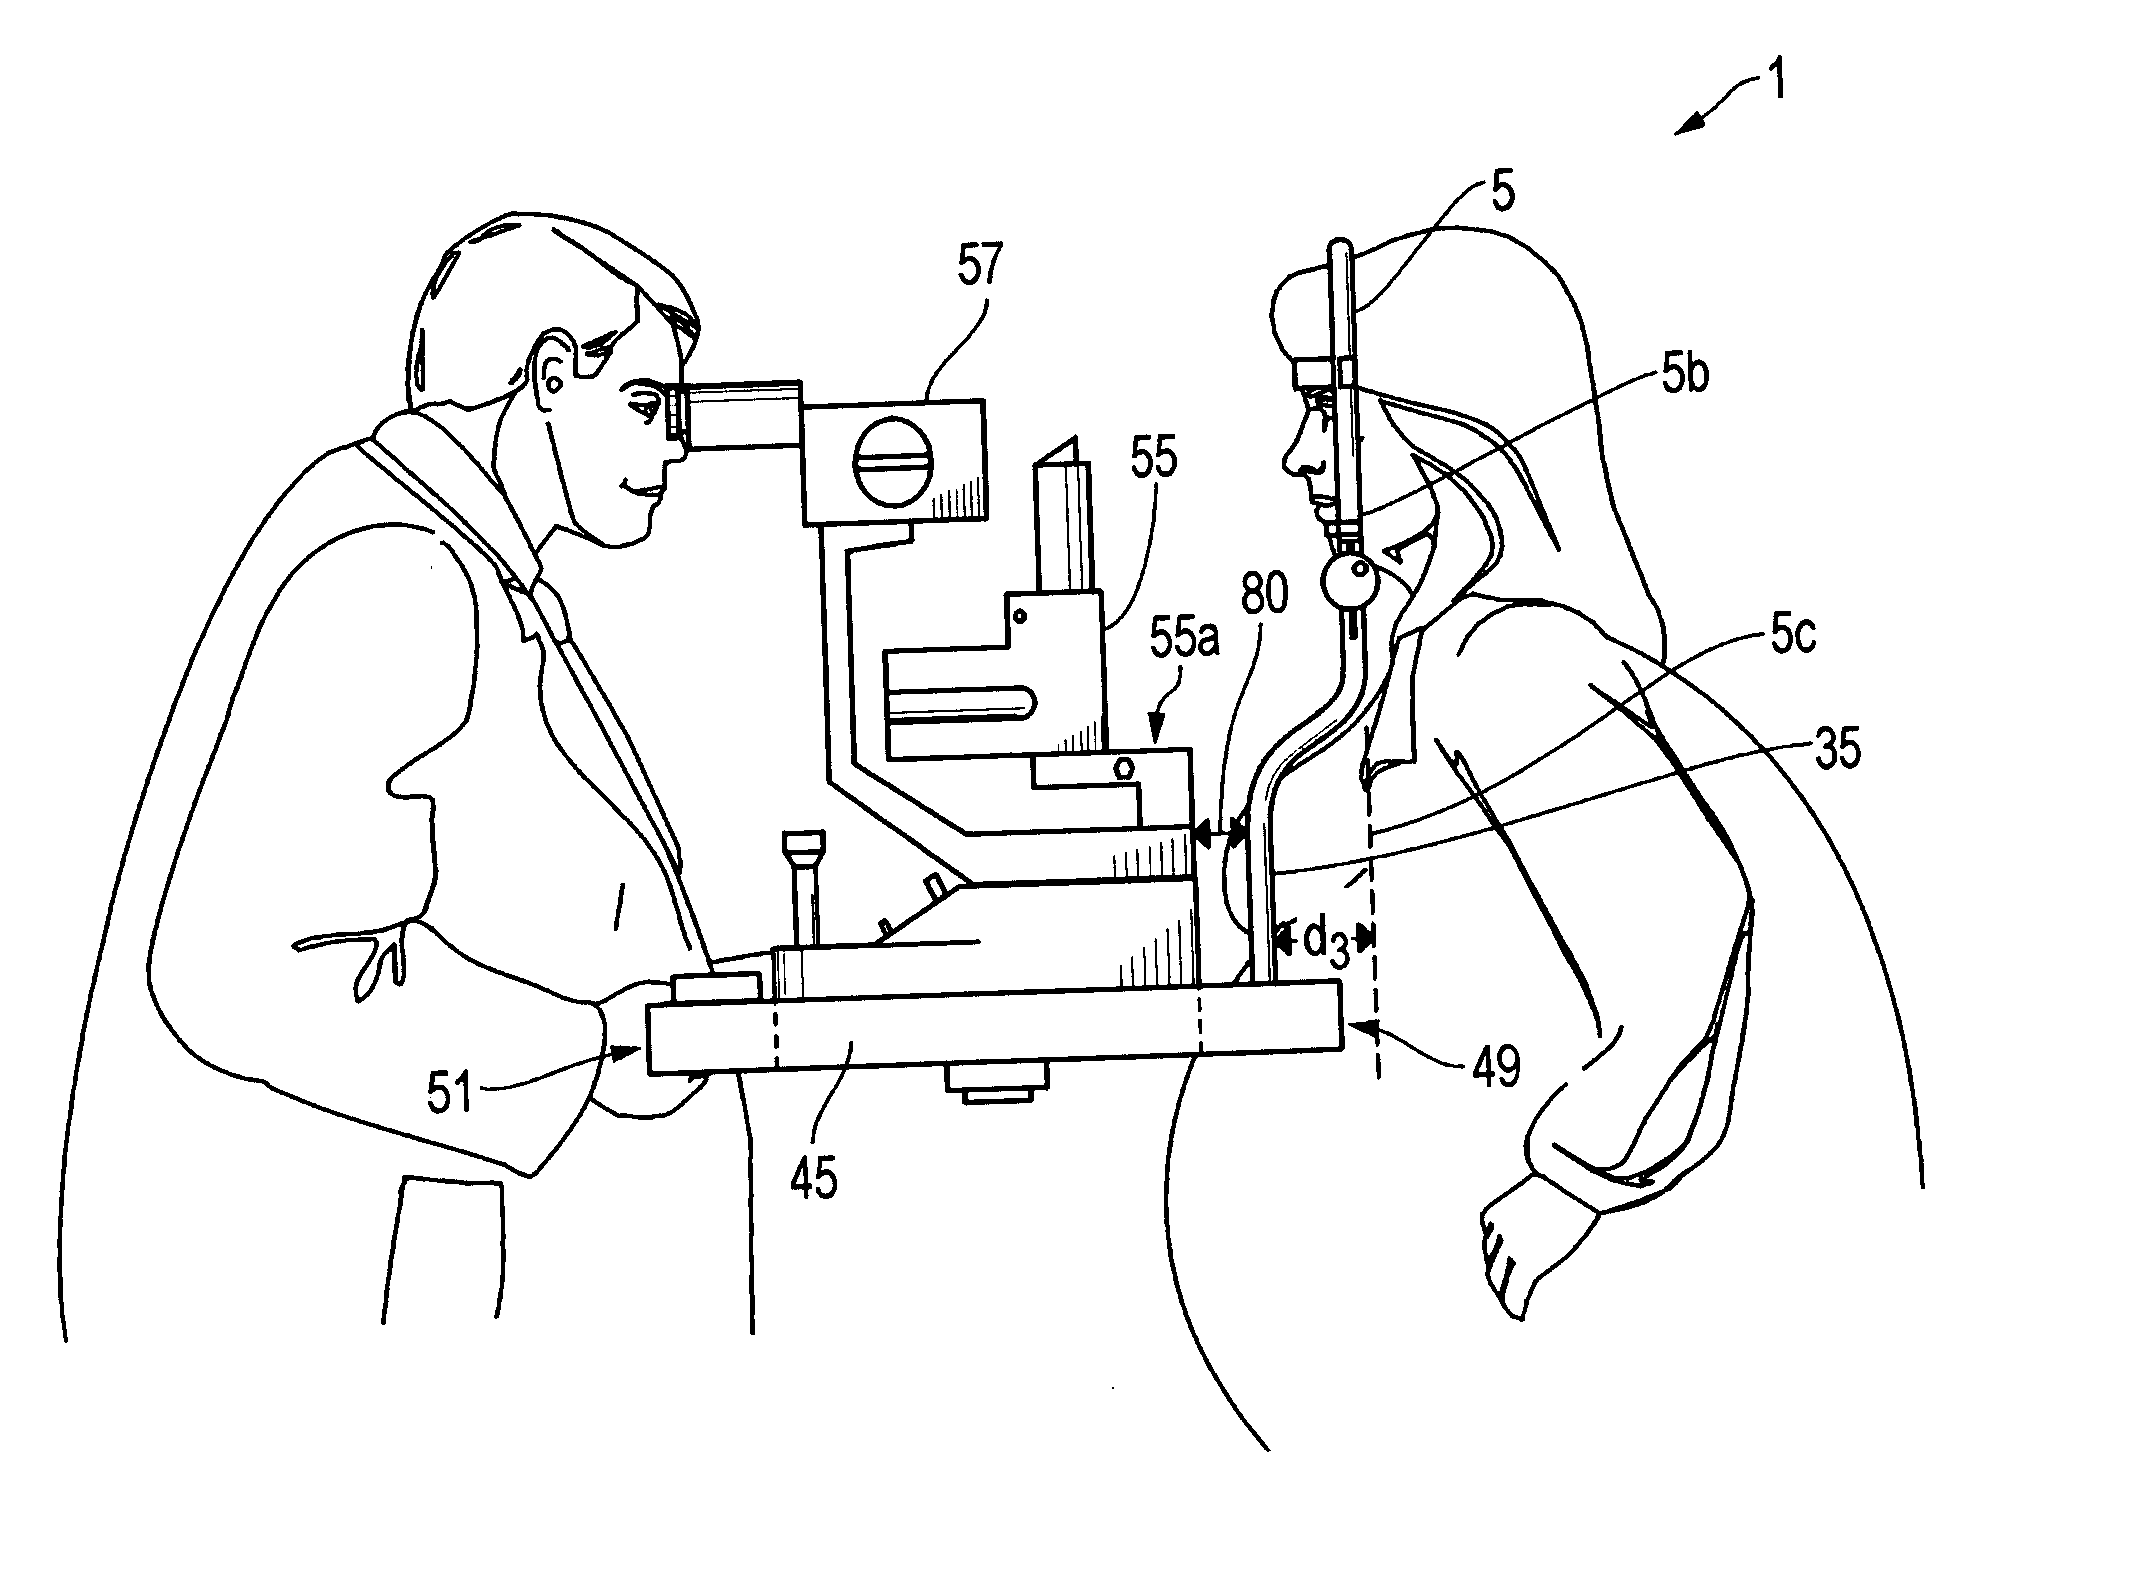 System, apparatus and method for accommodating opthalmic examination assemblies to patients